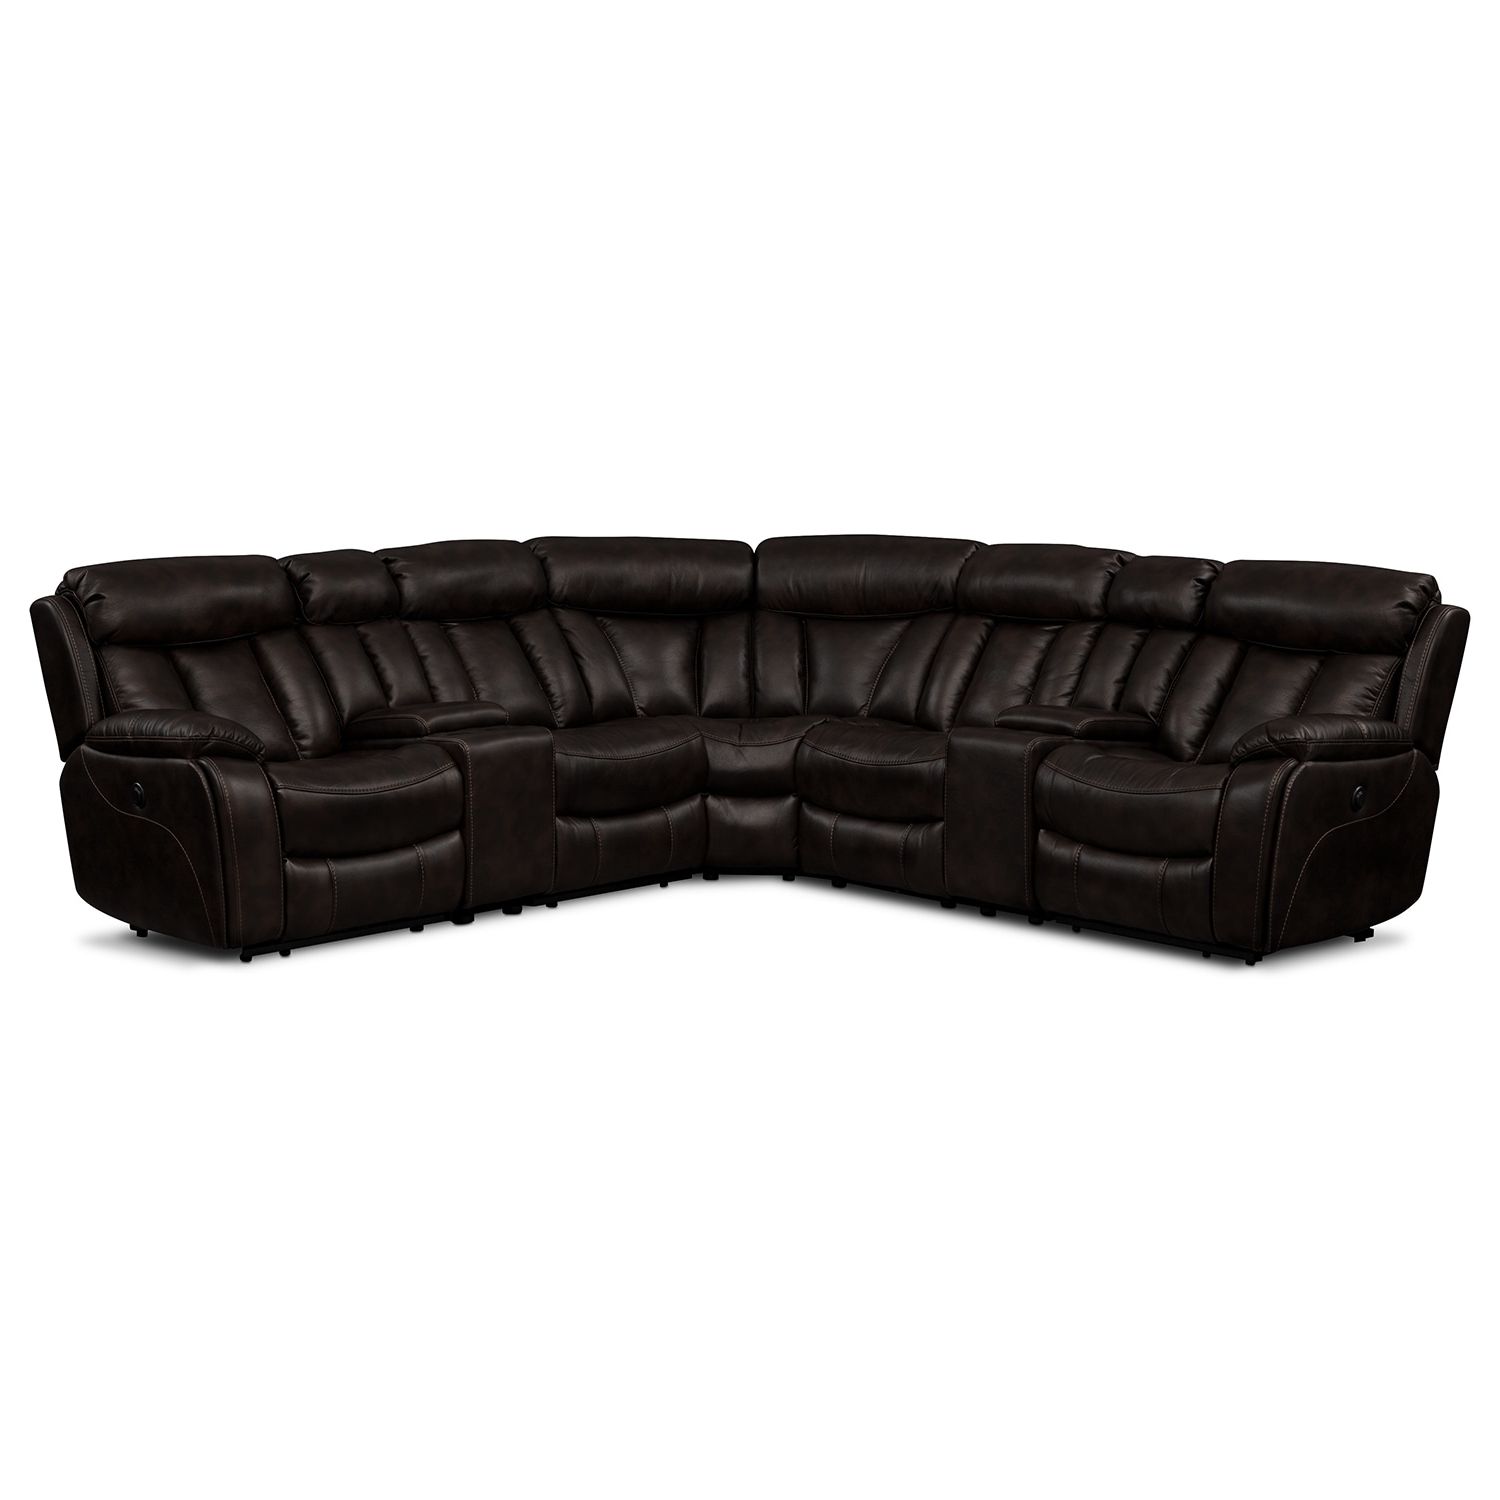 American Signature Furniture Pertaining To Sectional Sofas For Campers (View 10 of 15)